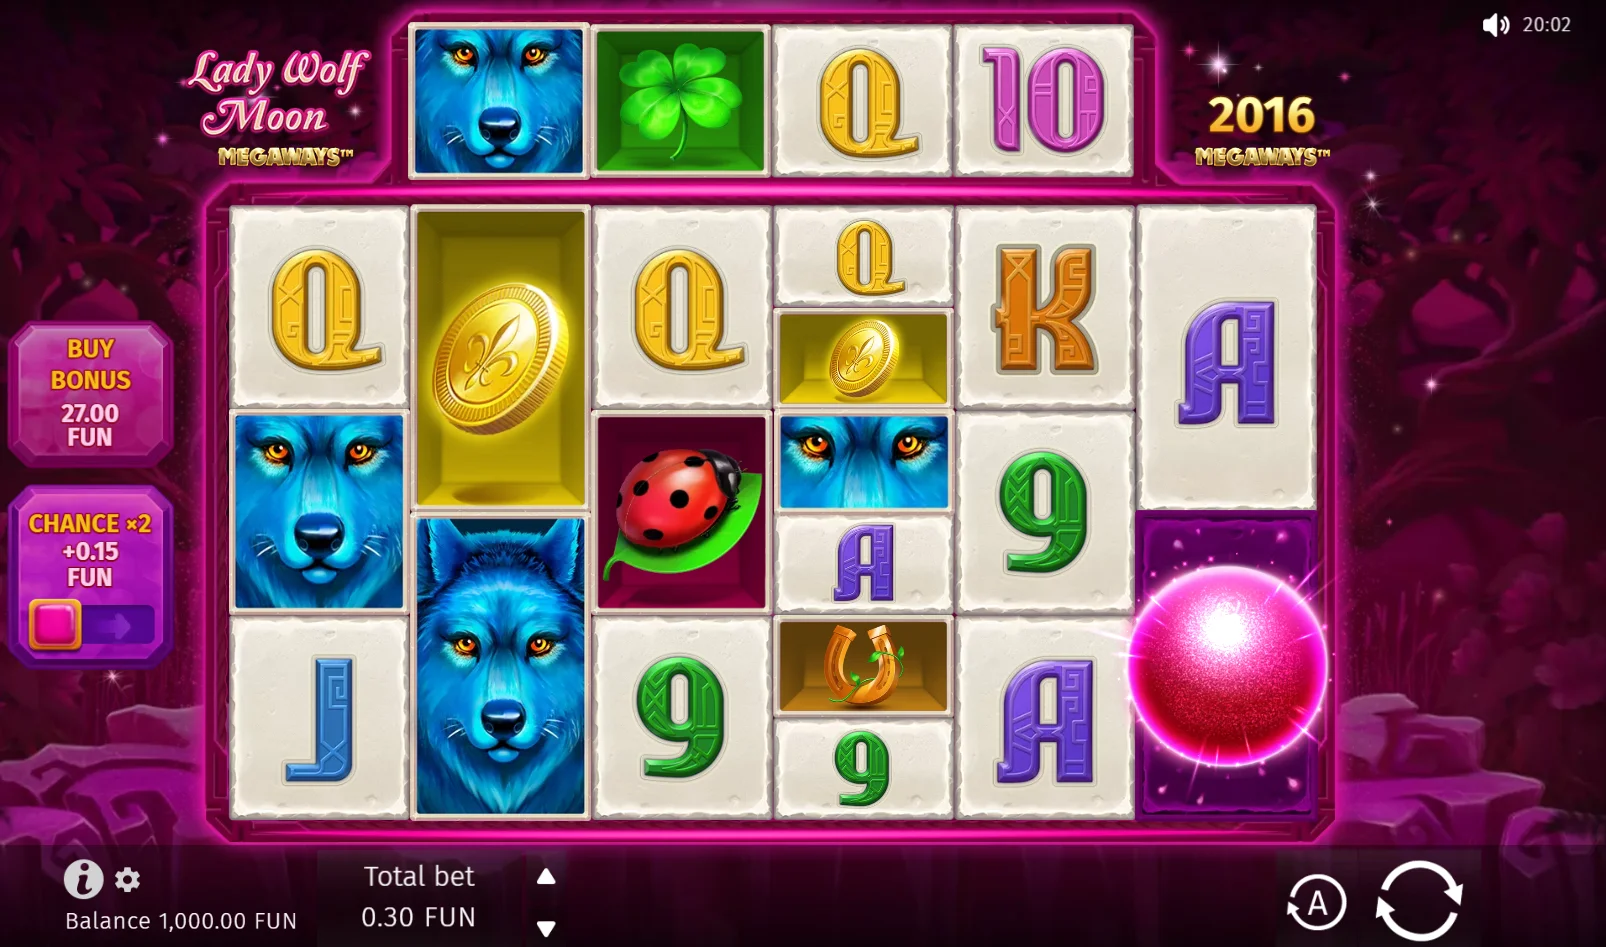 Example gameplay in slot lady wolf from megaways